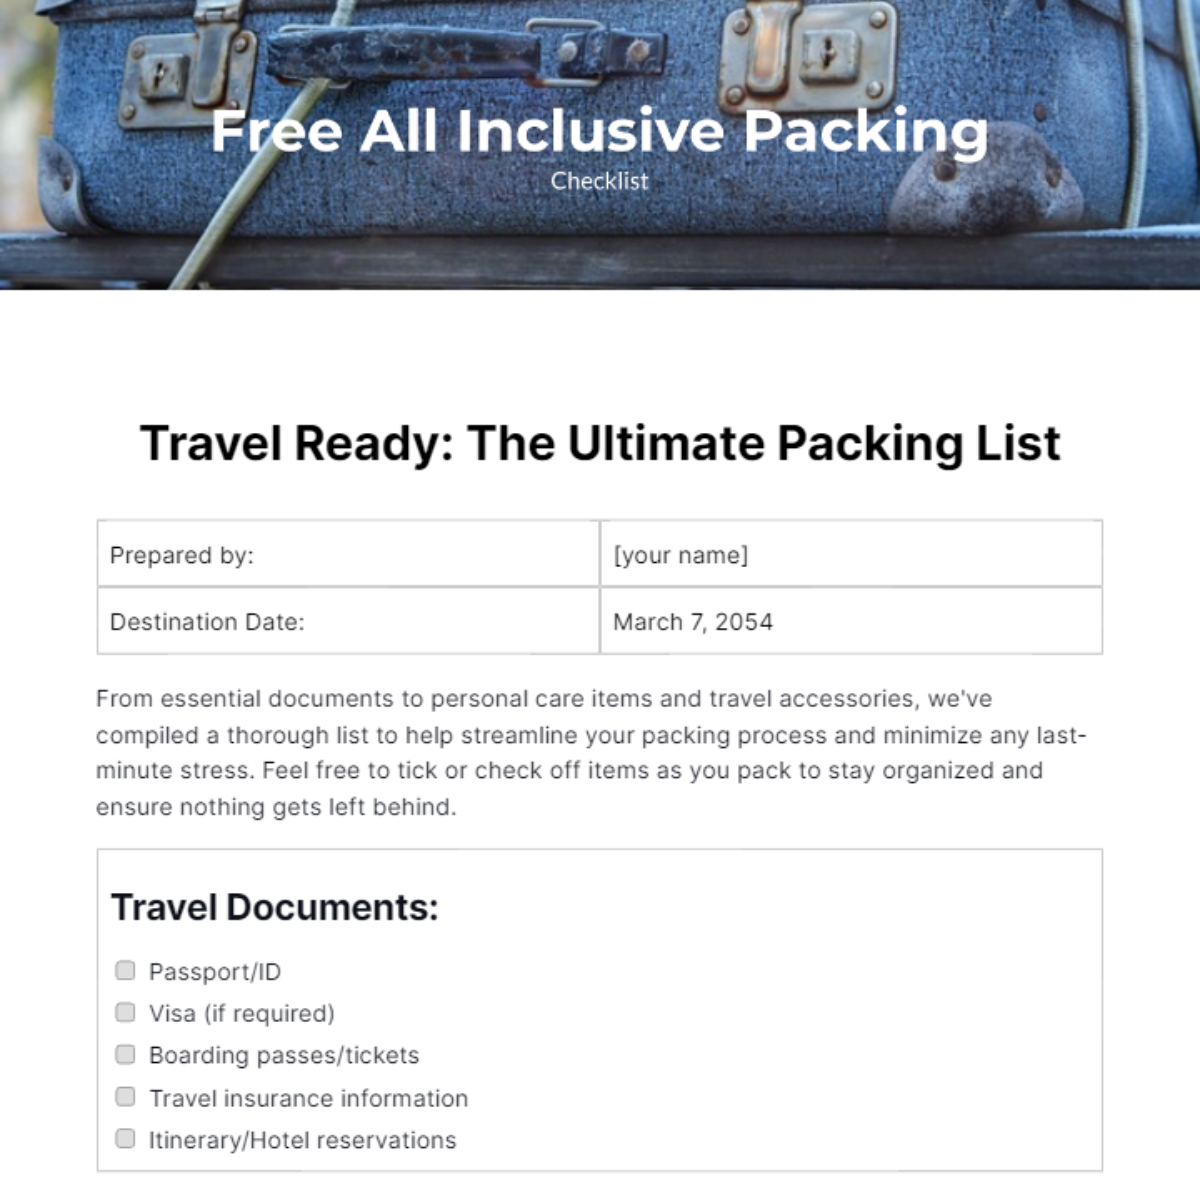 All Inclusive Packing Checklist Template